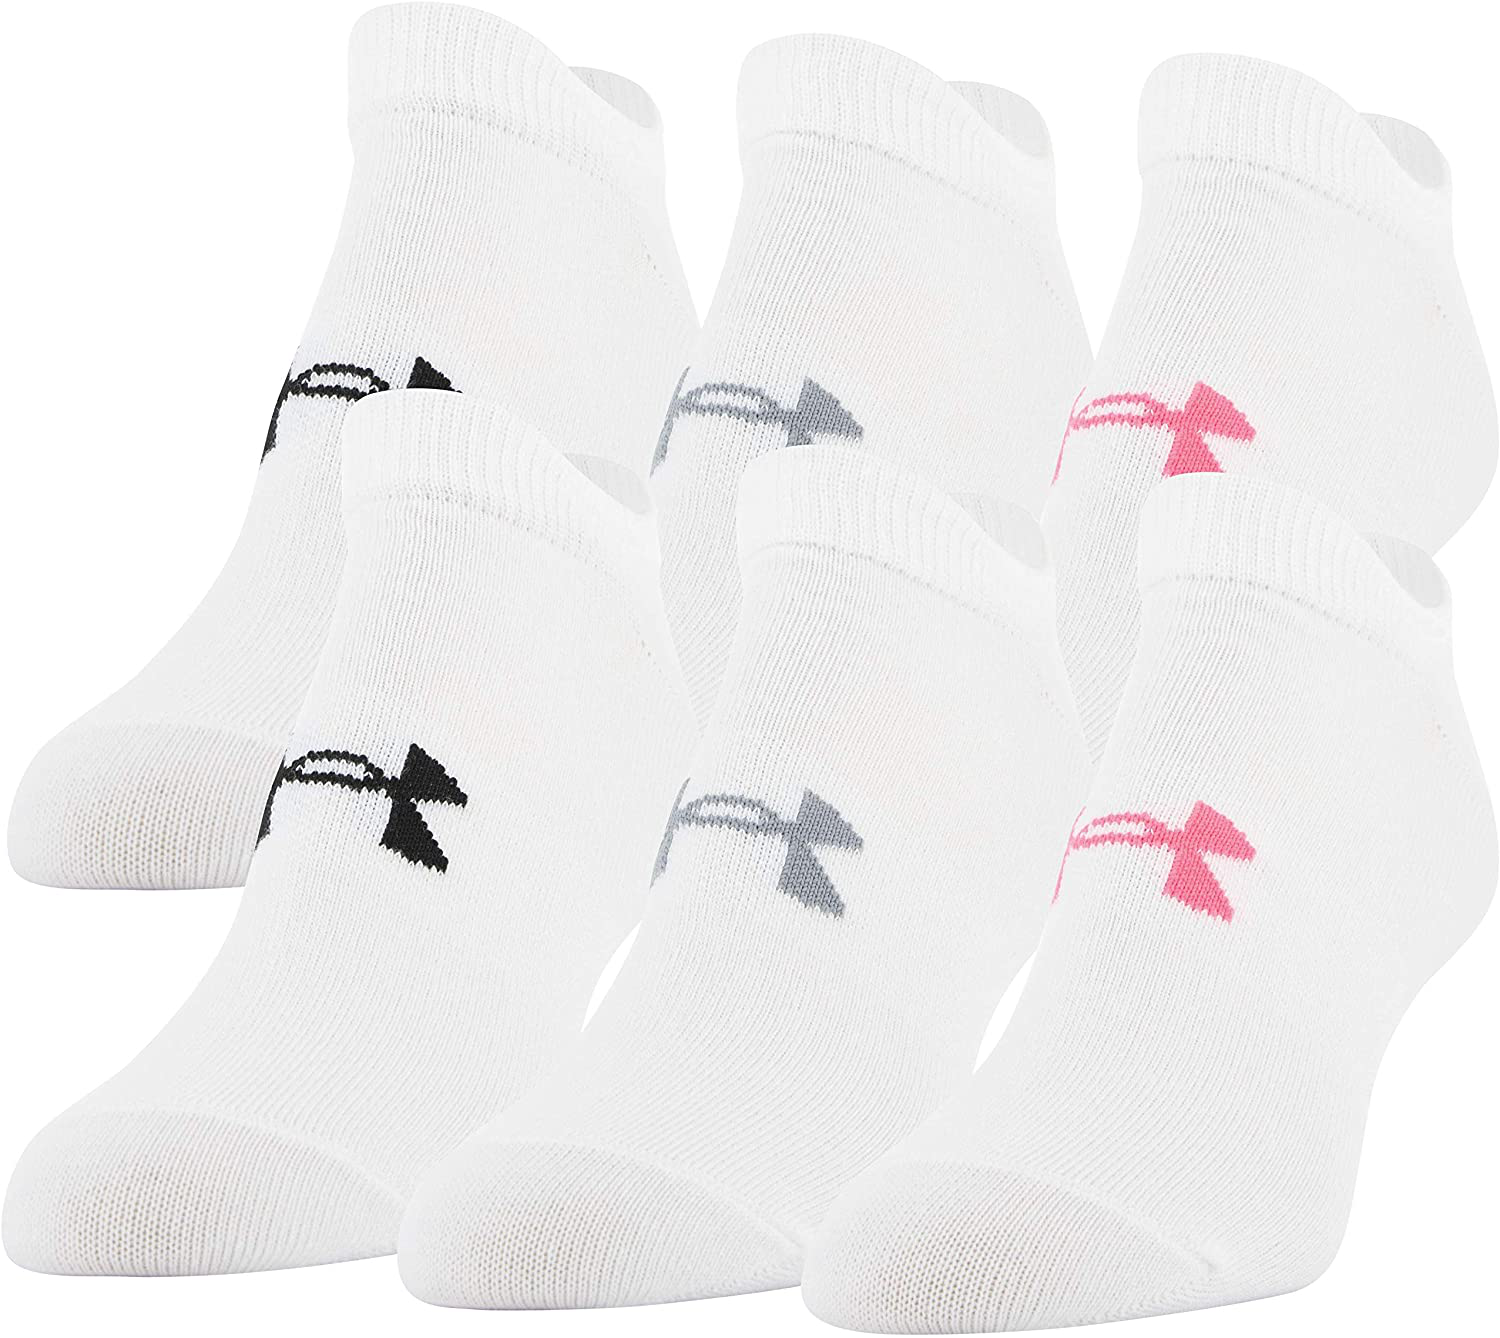 Under Armour Women'S Essential 2.0 No Show Socks, 6-Pairs